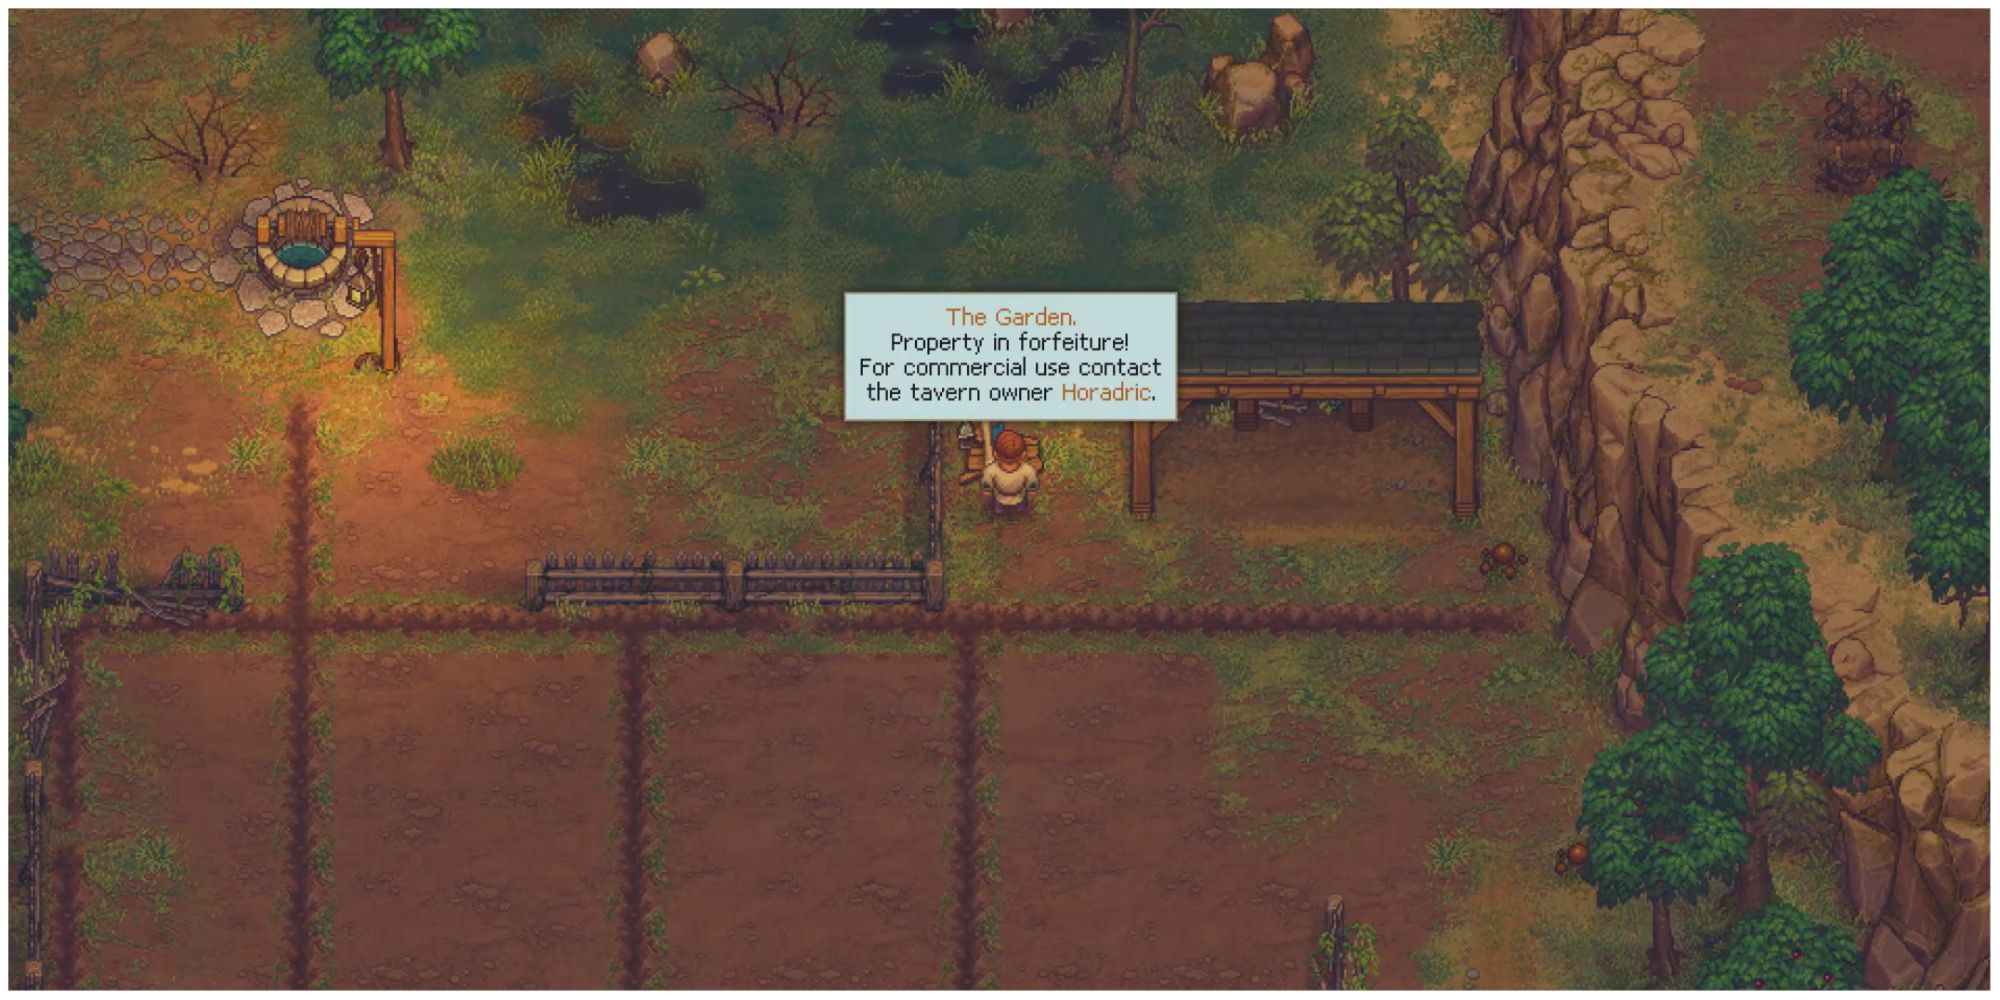 Graveyard Keeper garden bench in ruins, players are prompted to speak to tavern owner Horadric